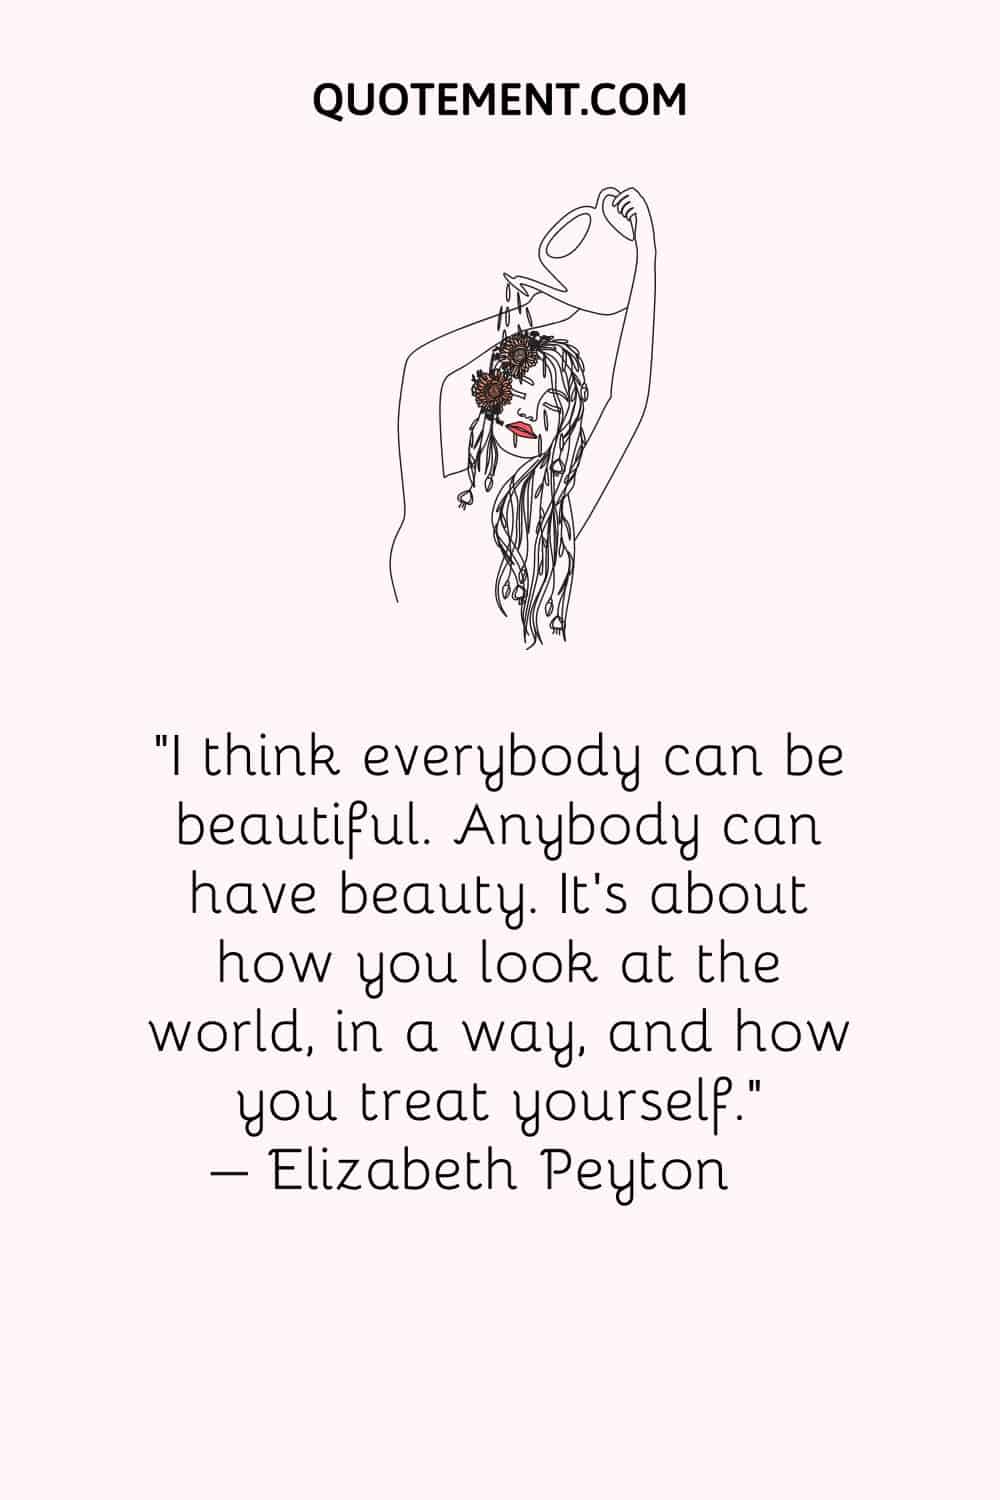 I think everybody can be beautiful